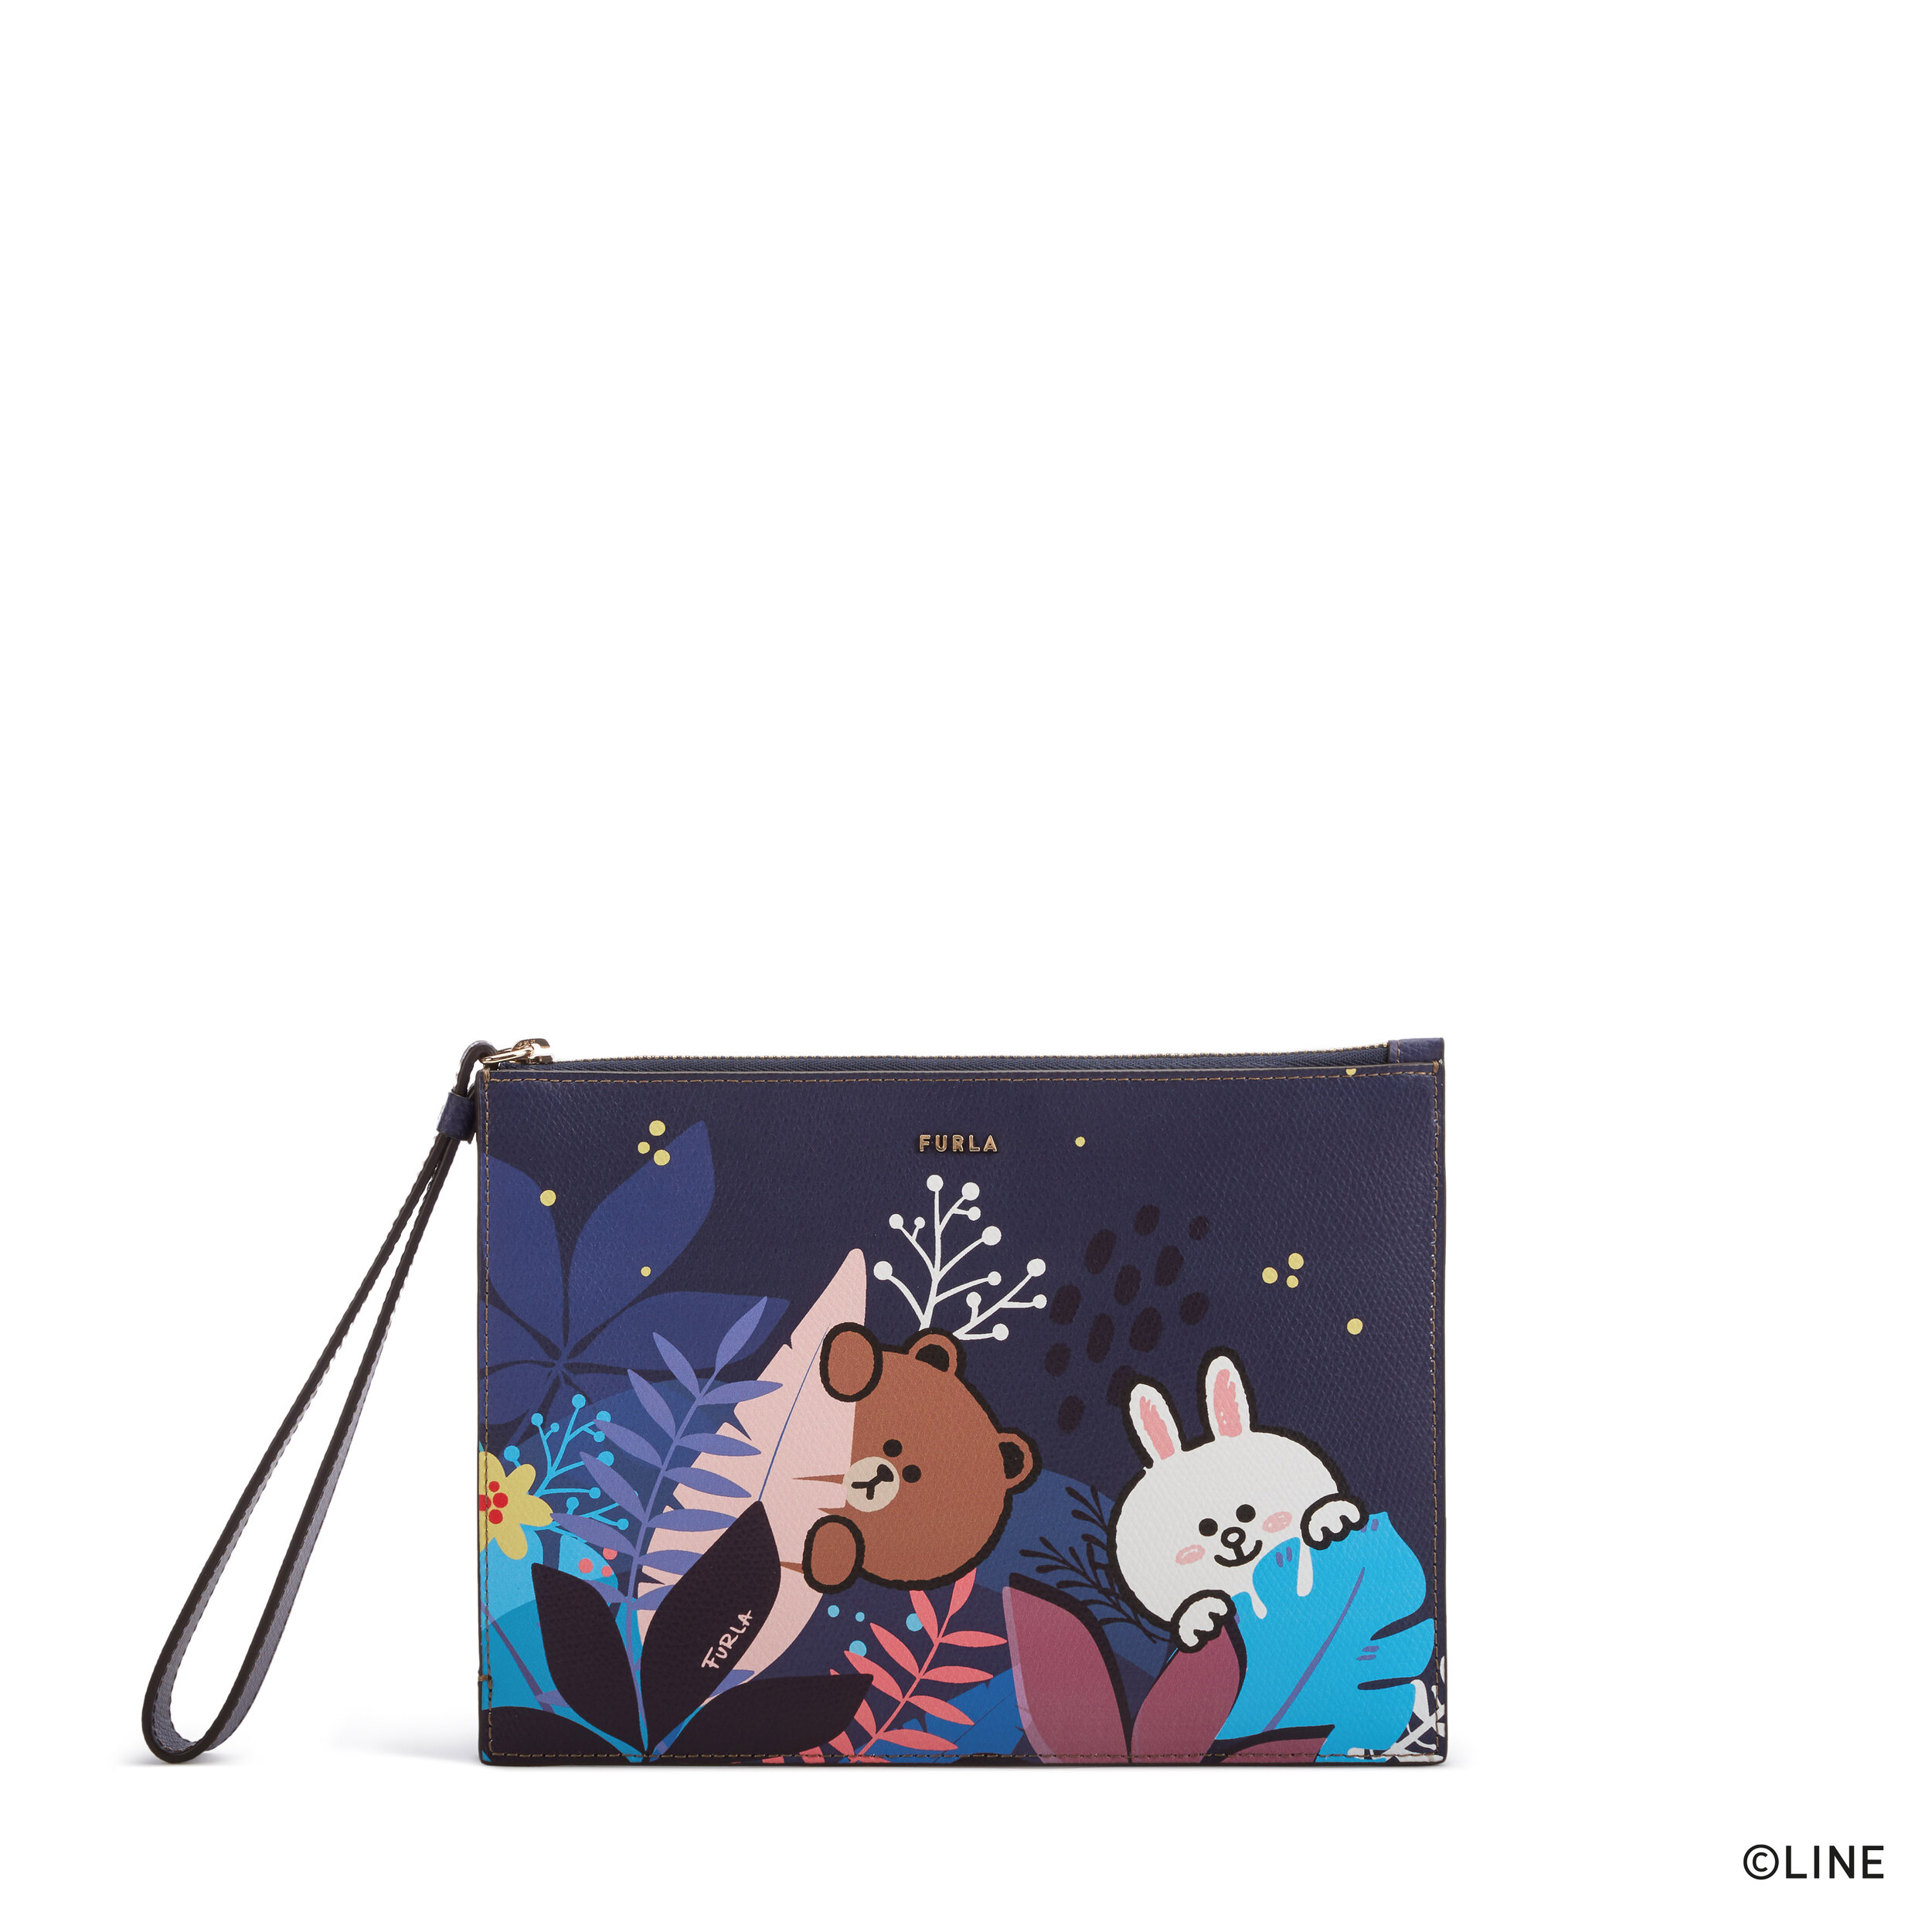 FURLA LINE FRIENDS S ENVELOPE_NIGHT PRINT ON ARES TEXTURED LEATHER_LF-copyright.jpg